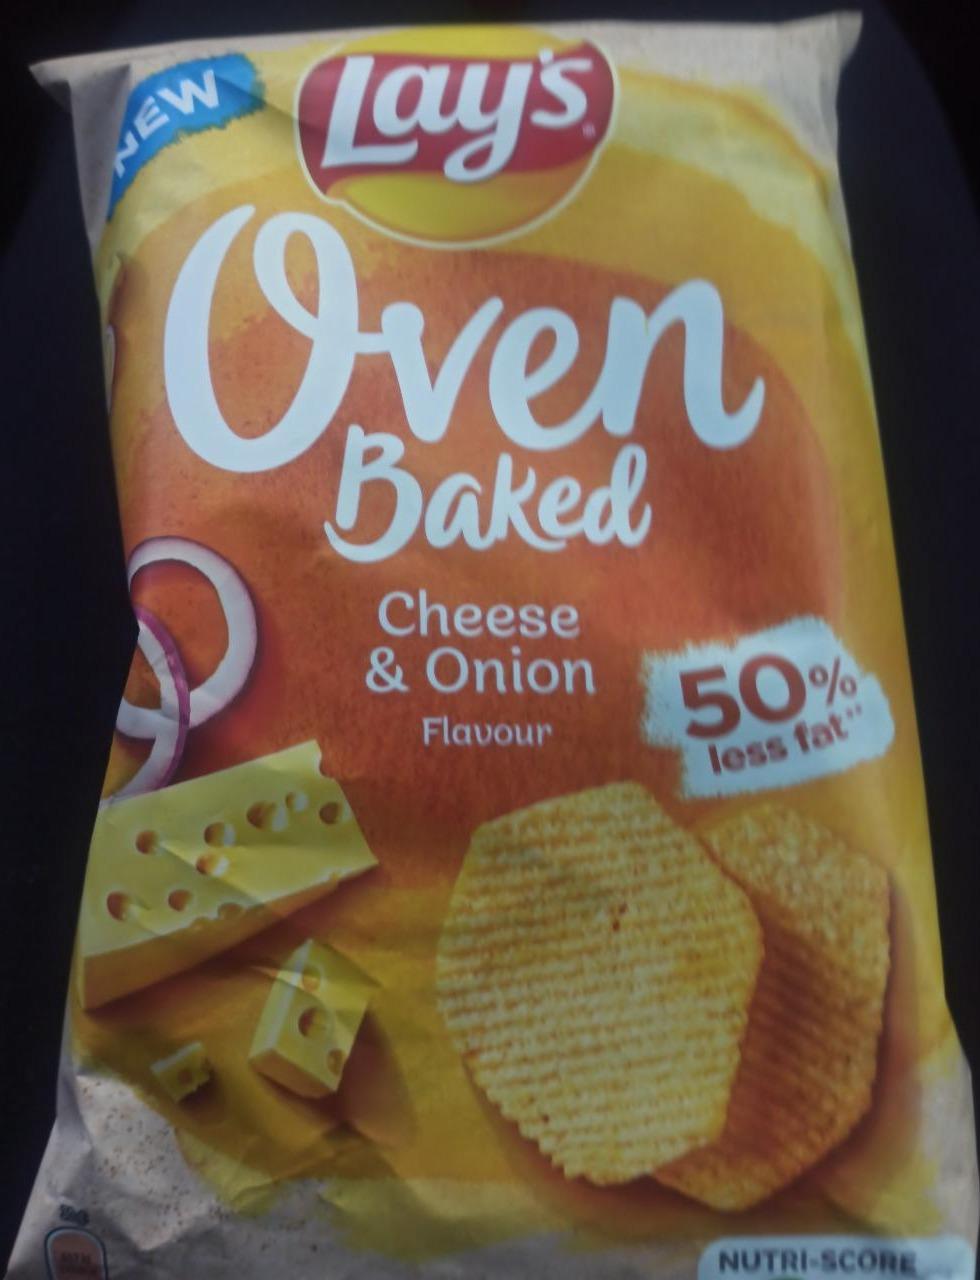 Fotografie - Oven baked cheese and onion Lays